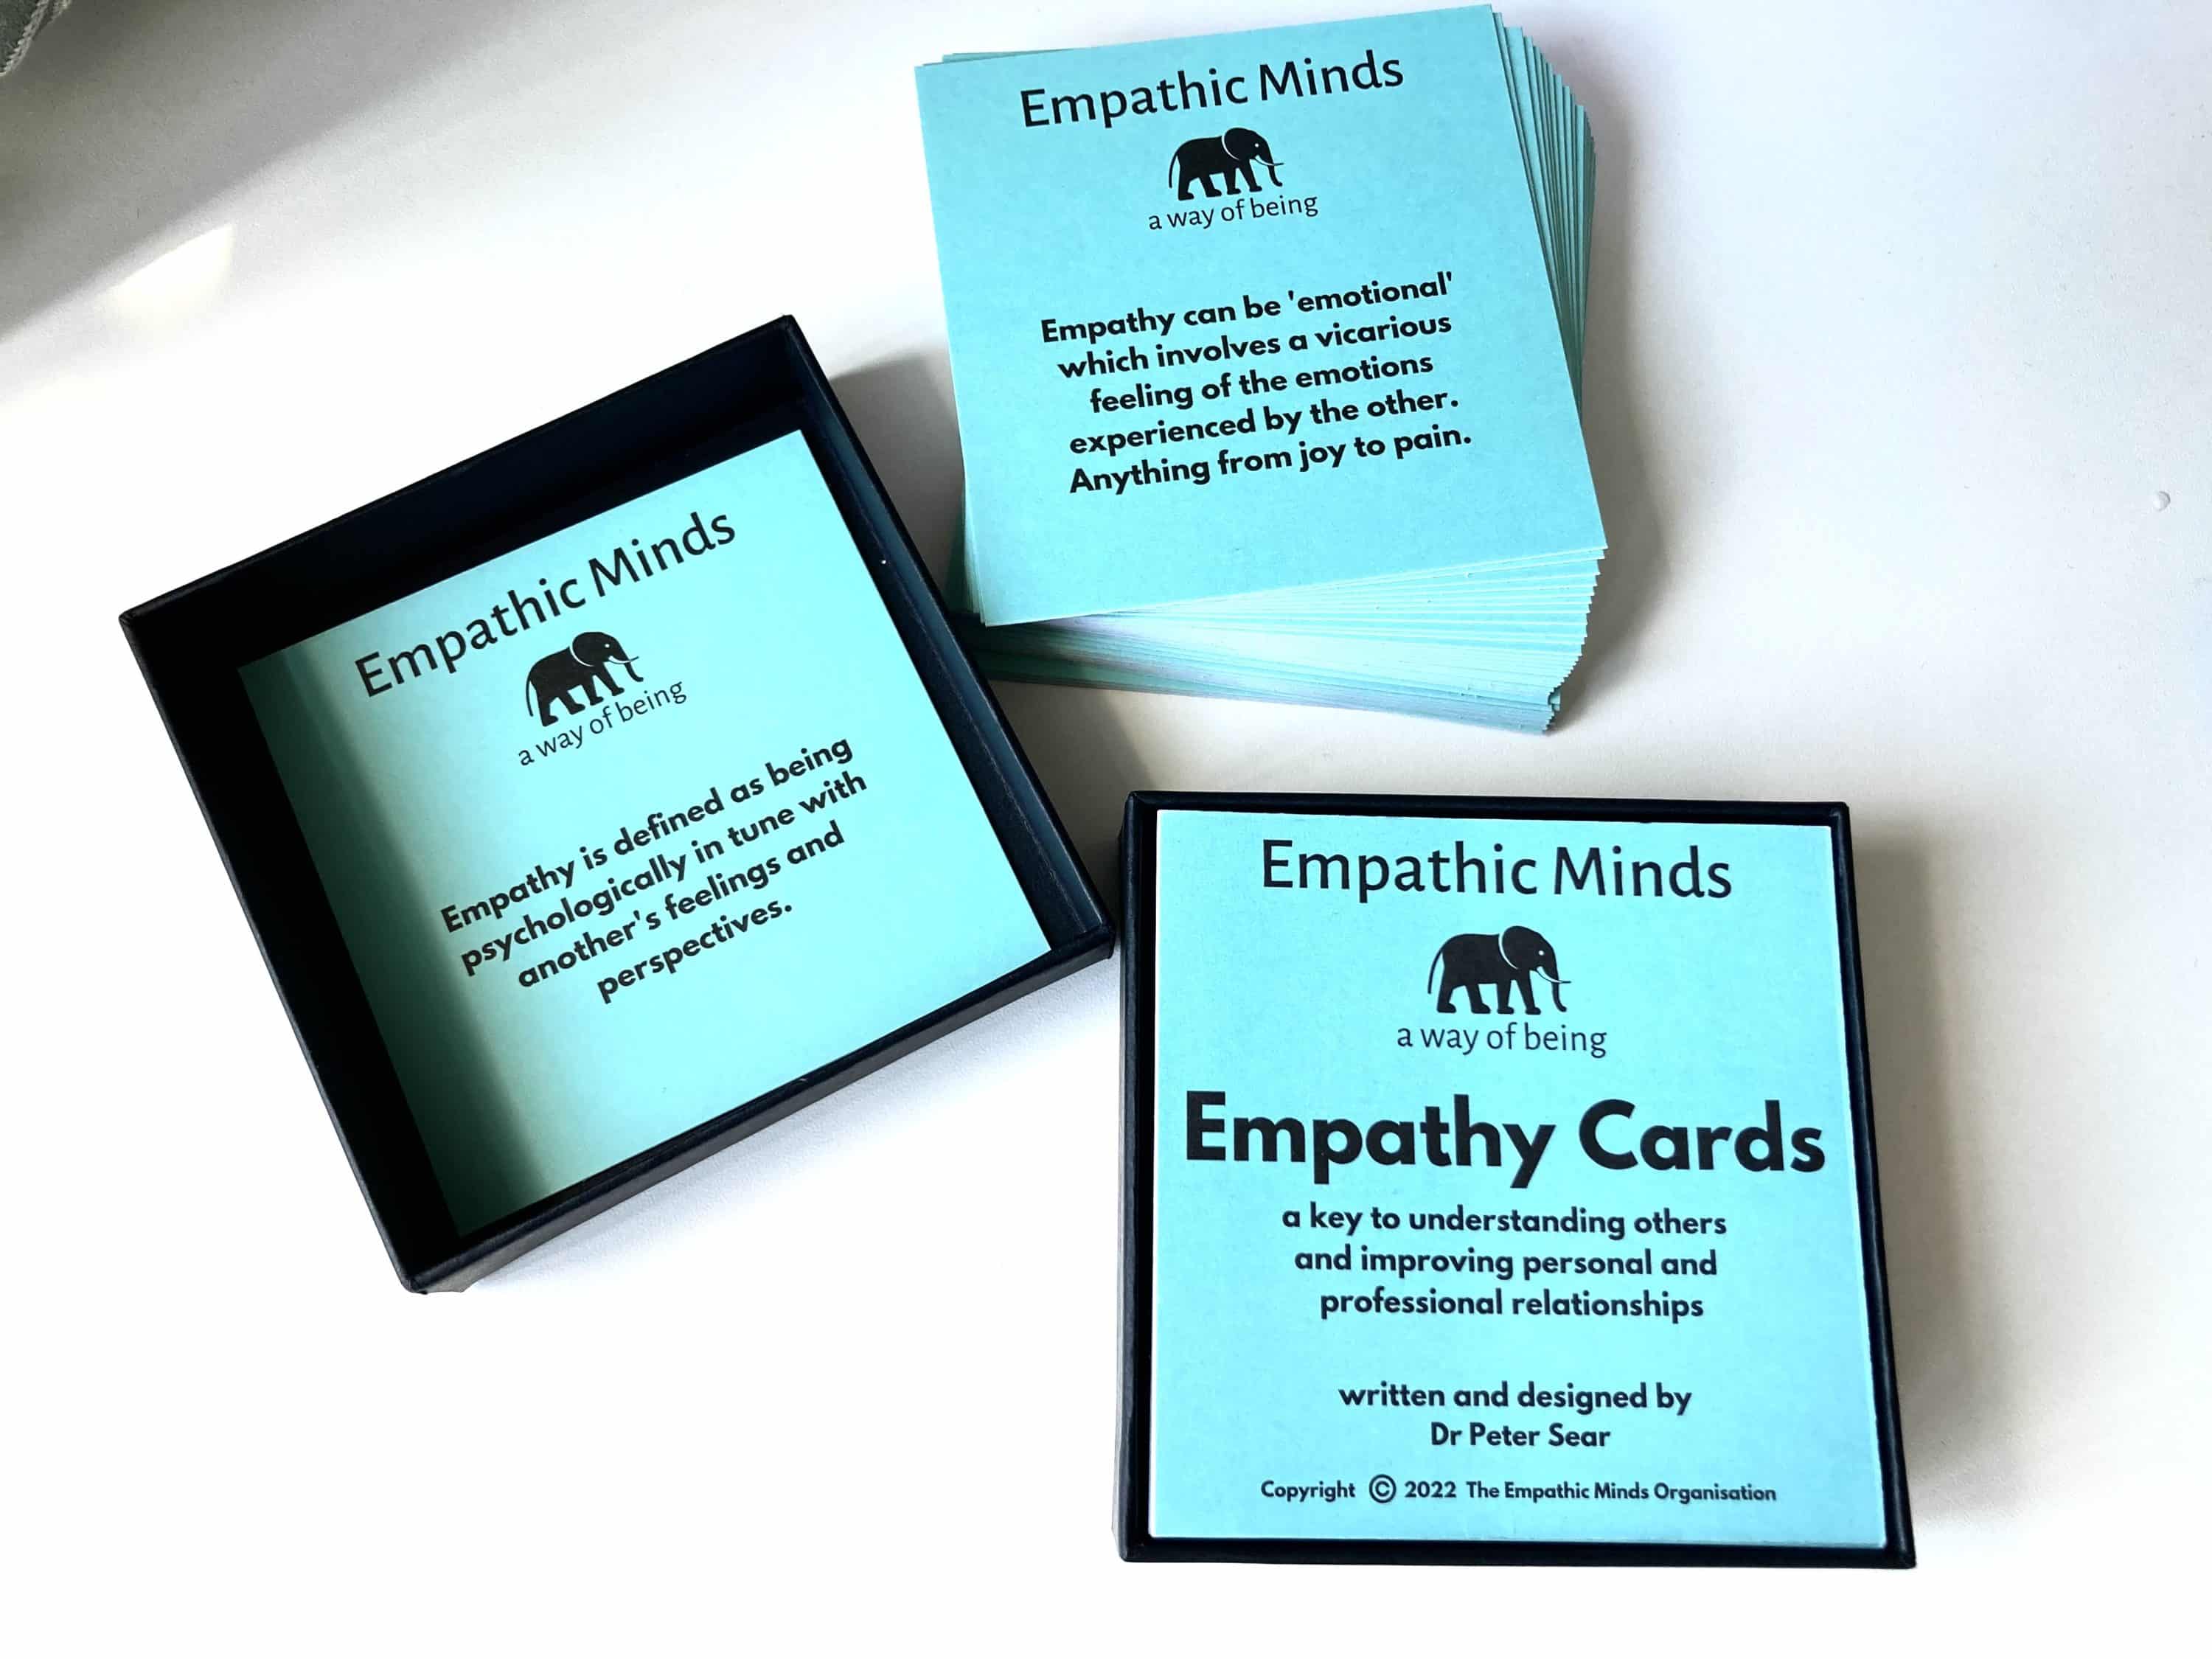 Empathy Cards from Empathic Minds